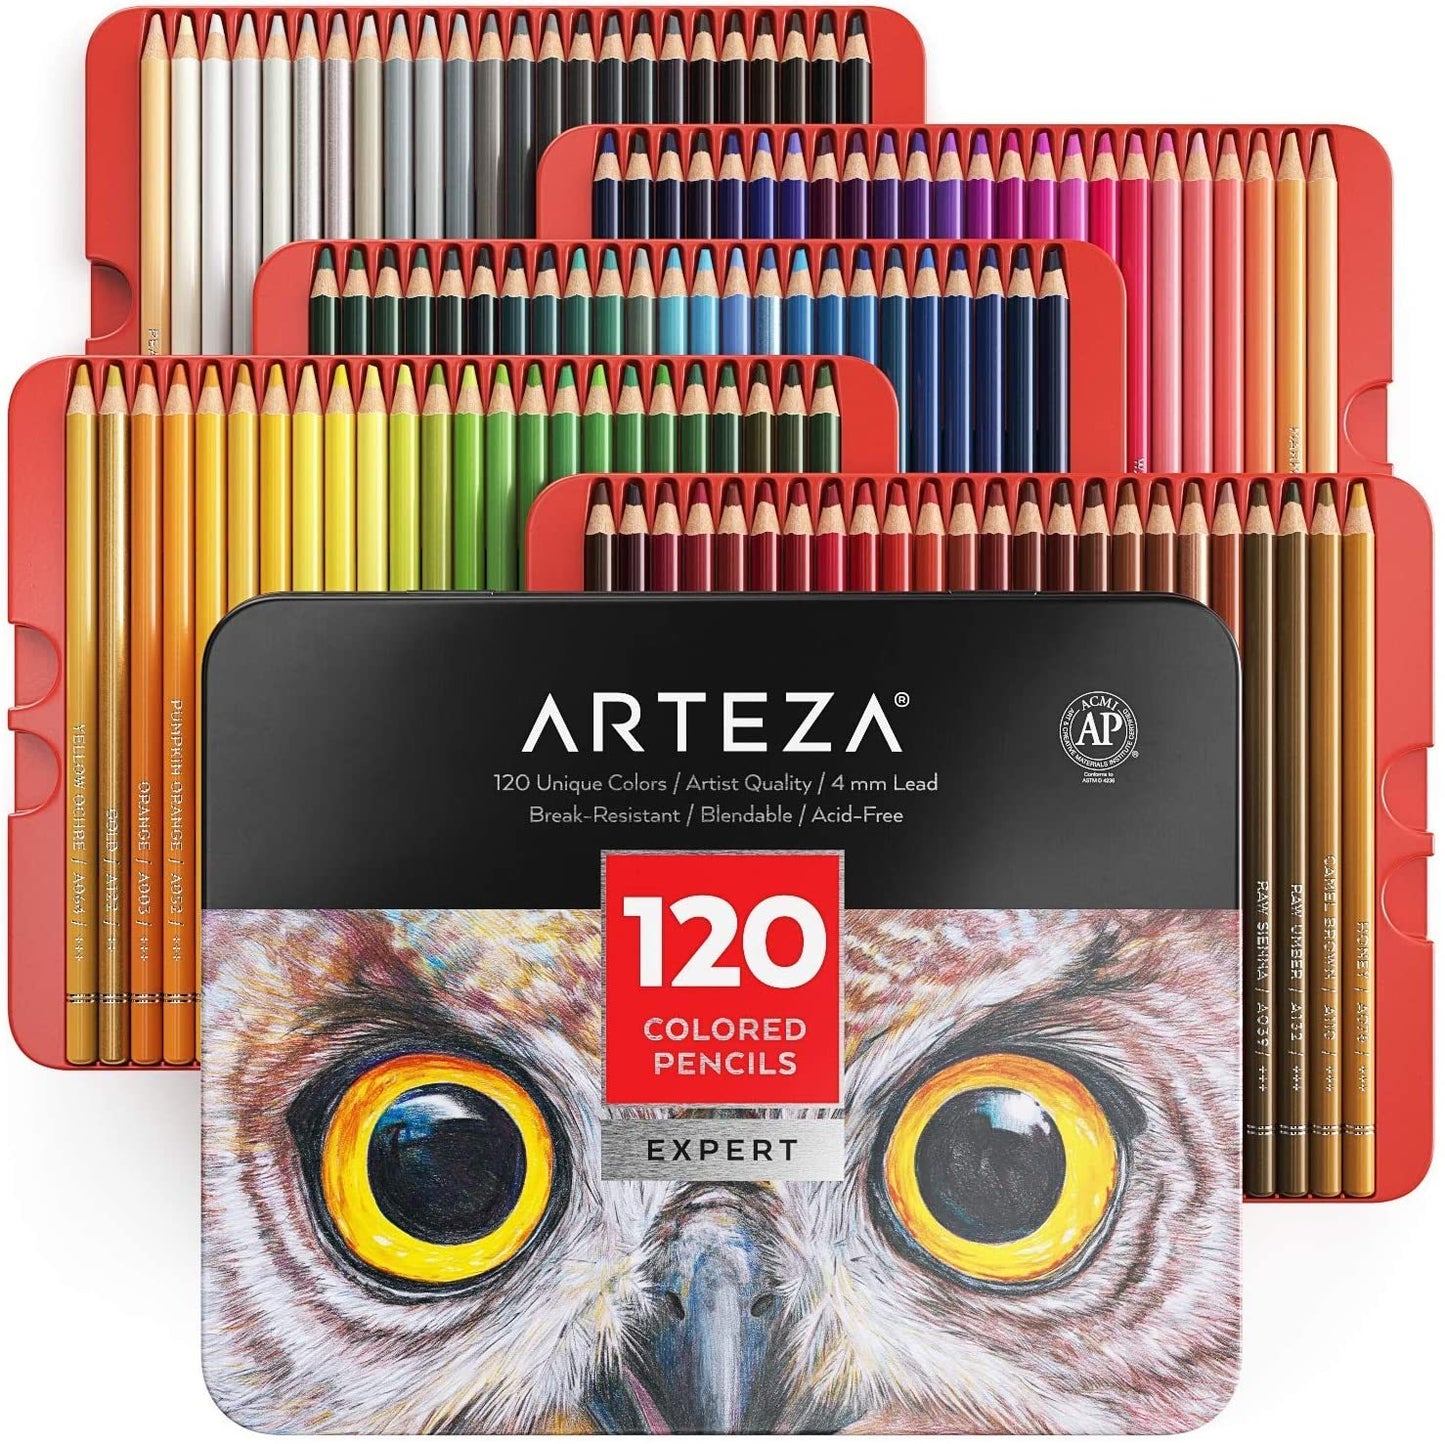 ARTEZA Colored Pencils for Adult Coloring, 120 Colors, Drawing Pencils with Soft Wax-Based Cores, Professional Art Supplies for Artists, Vibrant Pencil Set in Tin Box for Beginners and Pro Artists